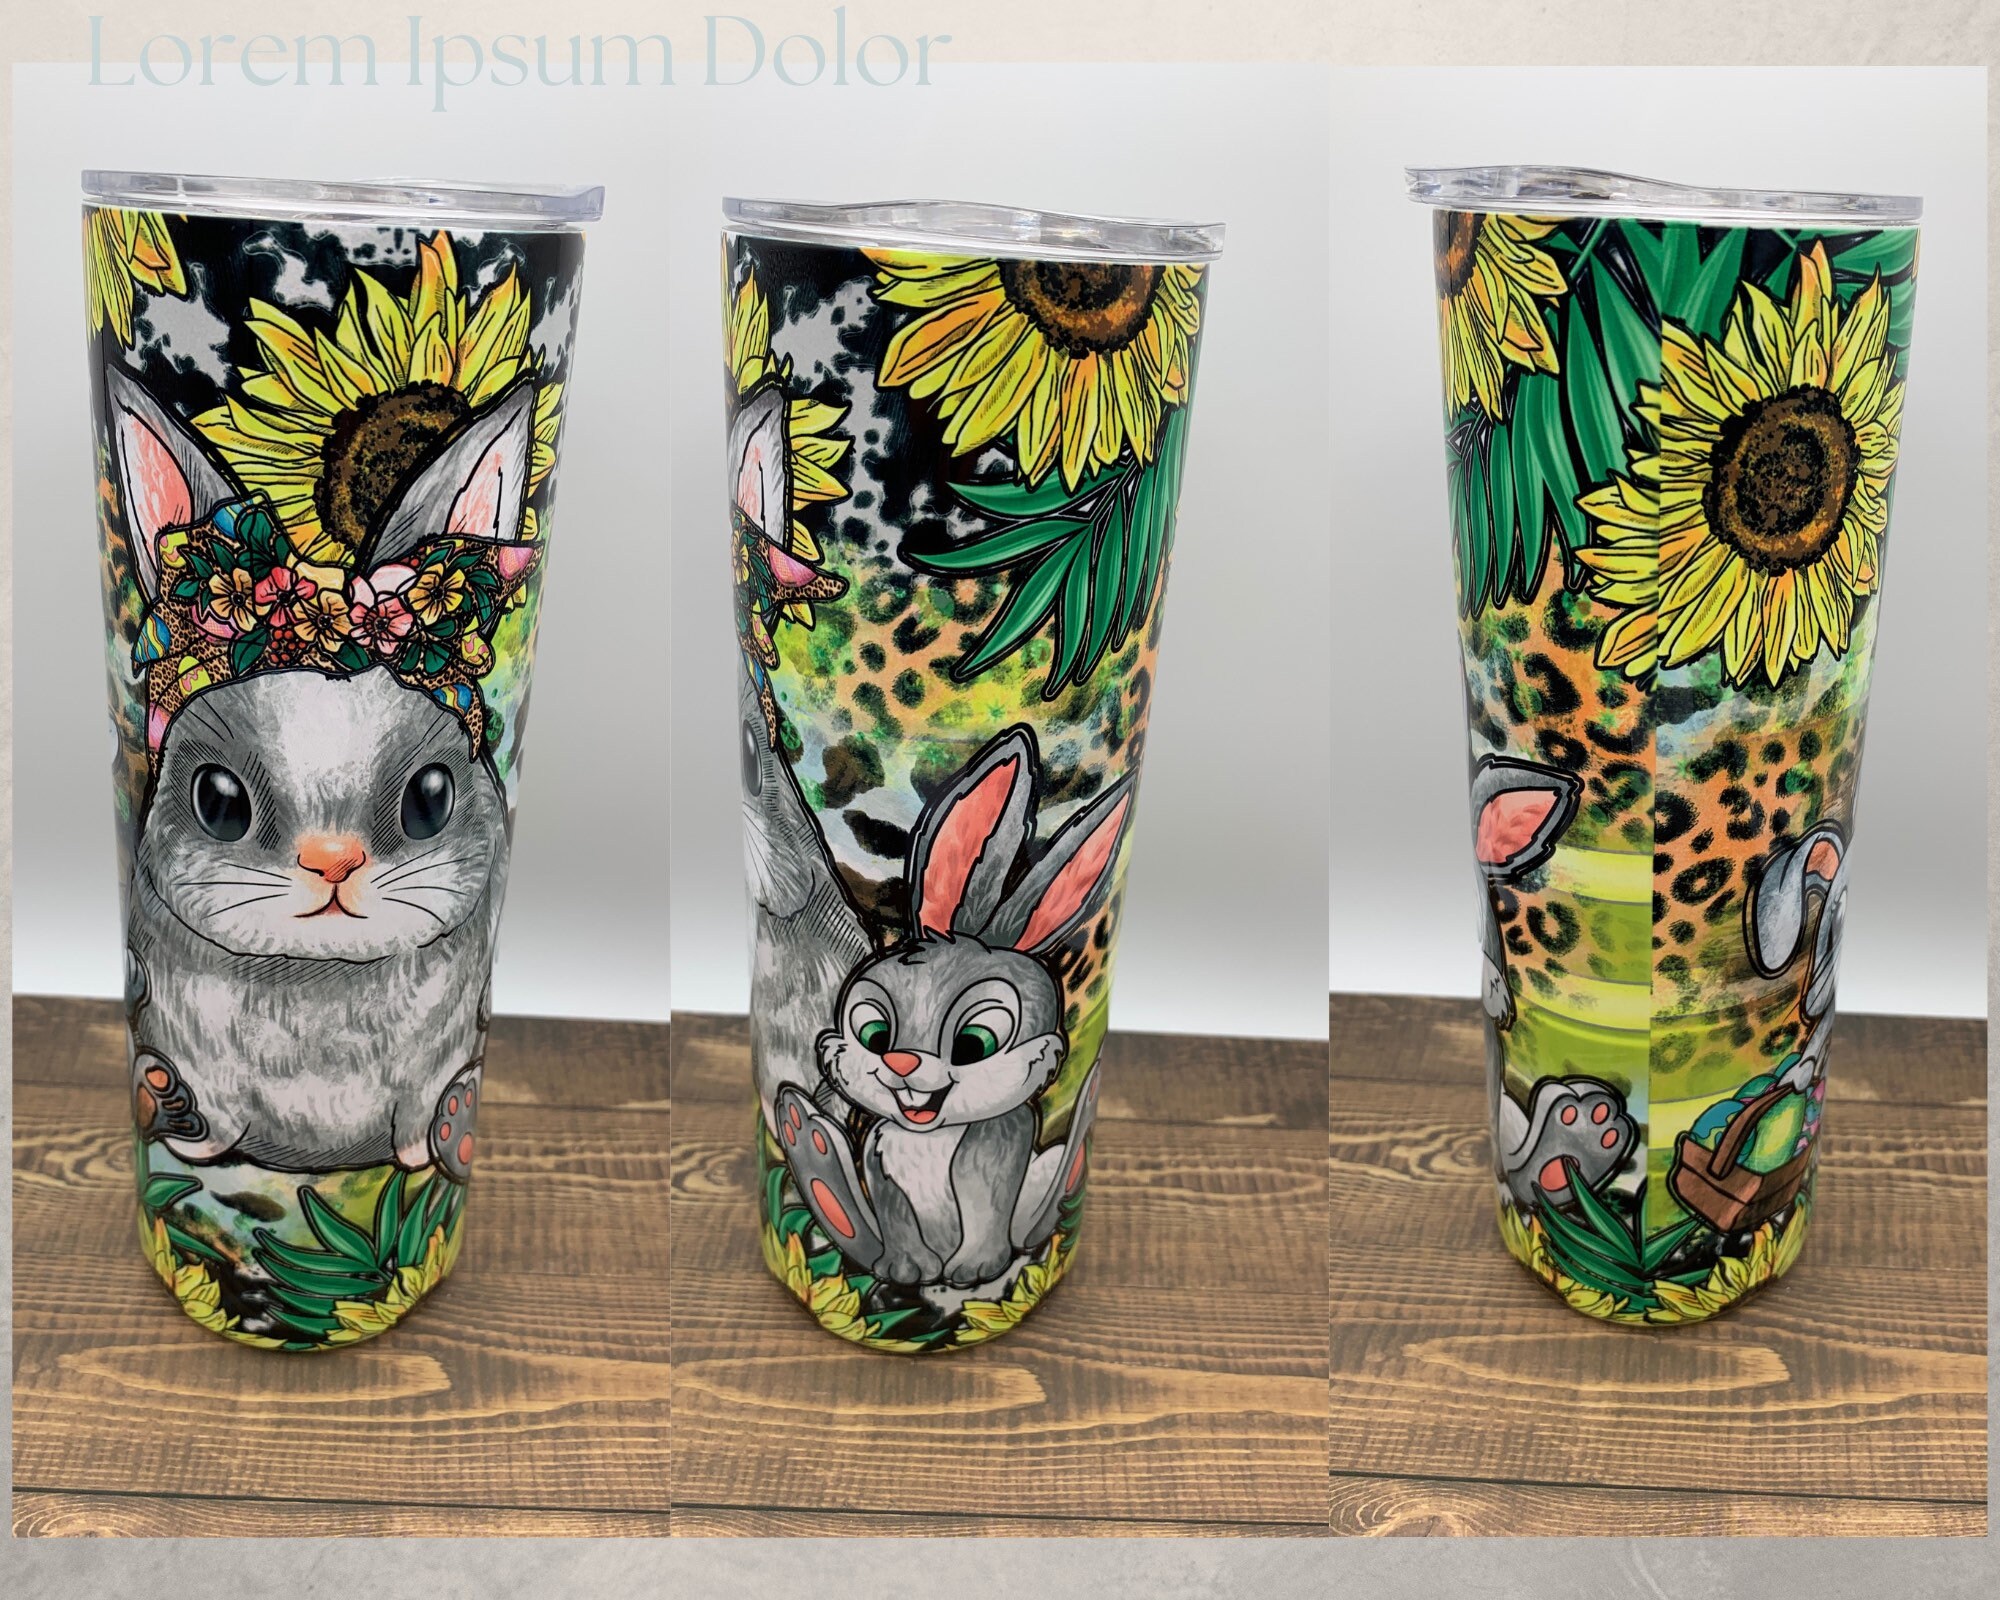 20 oz Insulated Stainless Steel Tumbler Mug Cute Easter Bunny with